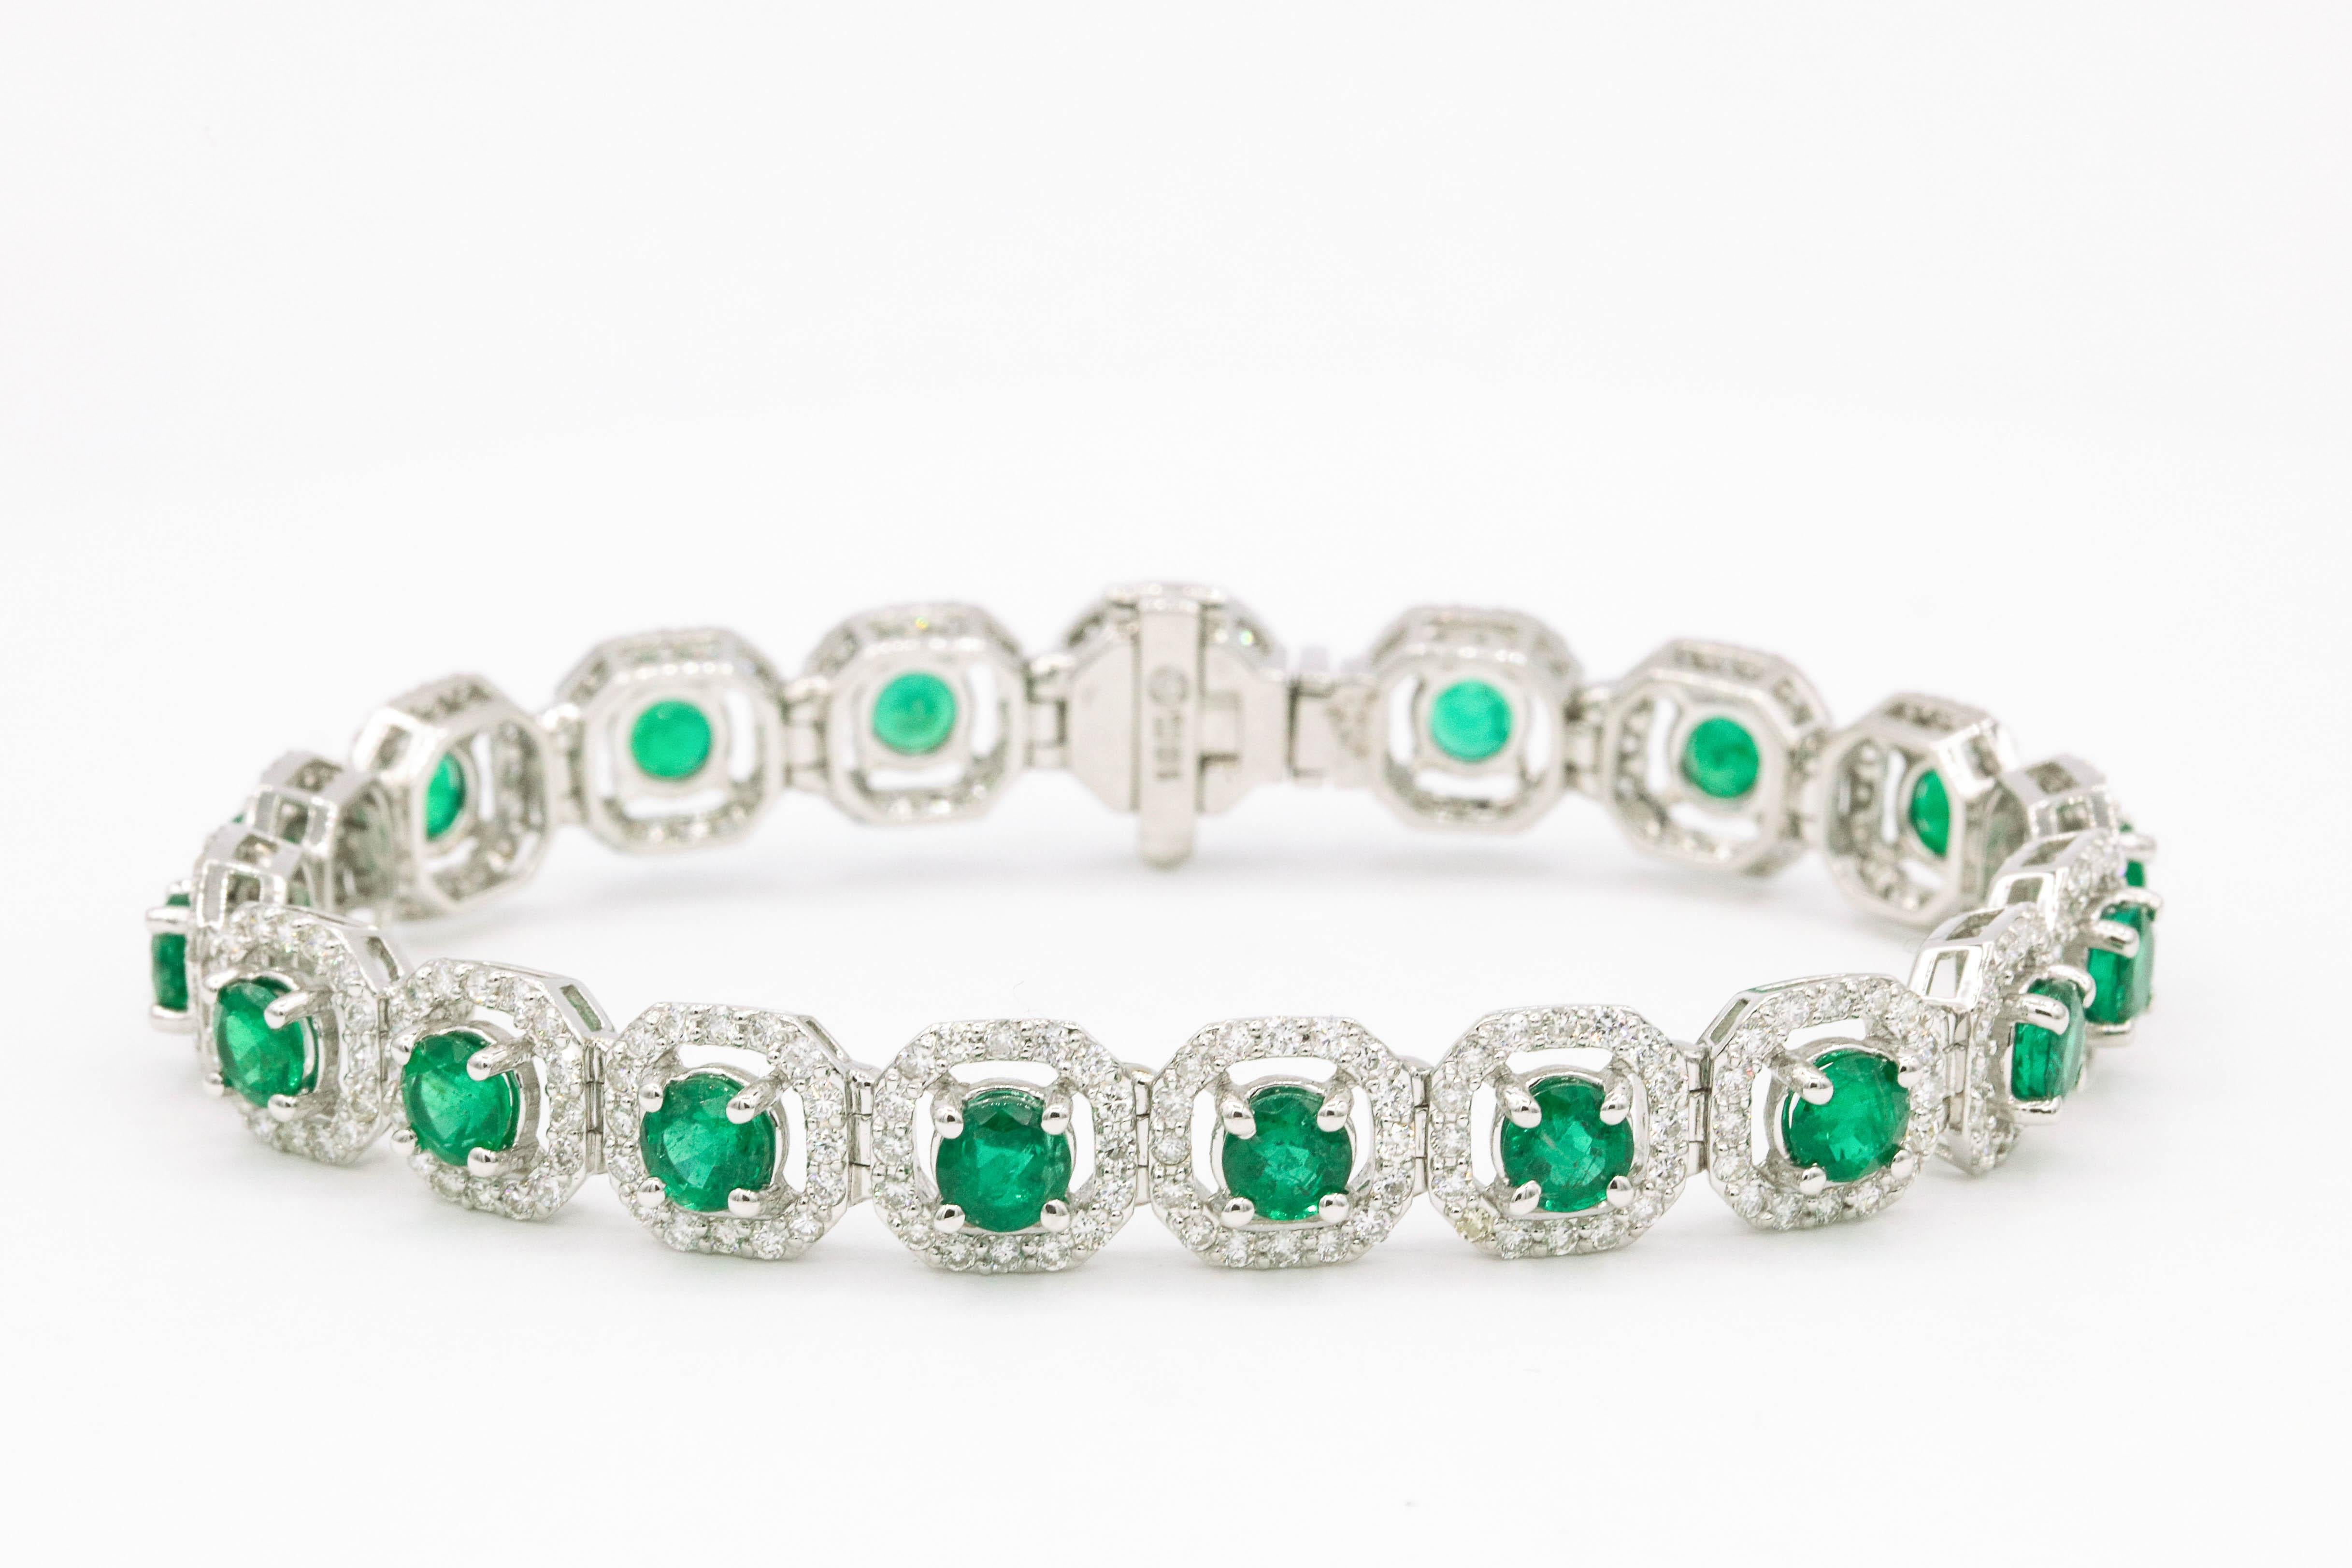 Nineteen round green emeralds, 7.02 carats, flanked with 304 round brilliants weighing 3.50 carats, in 18k white gold. 